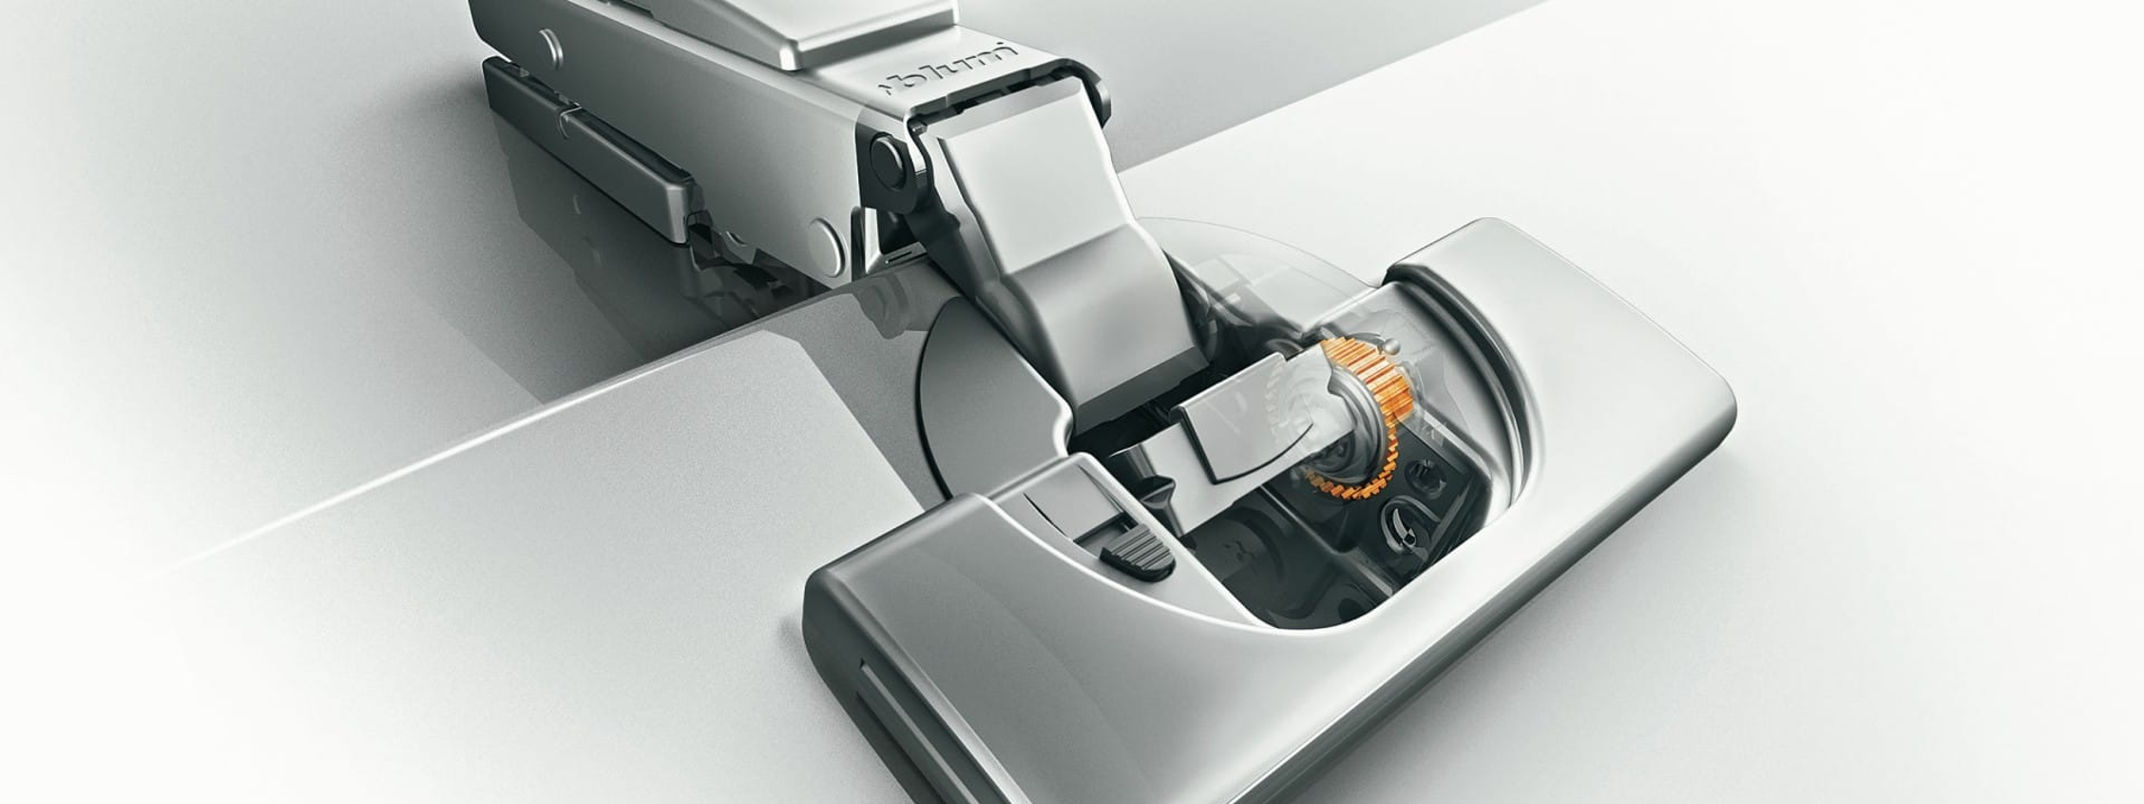 How is Blum transforming the furniture fittings industry in India?